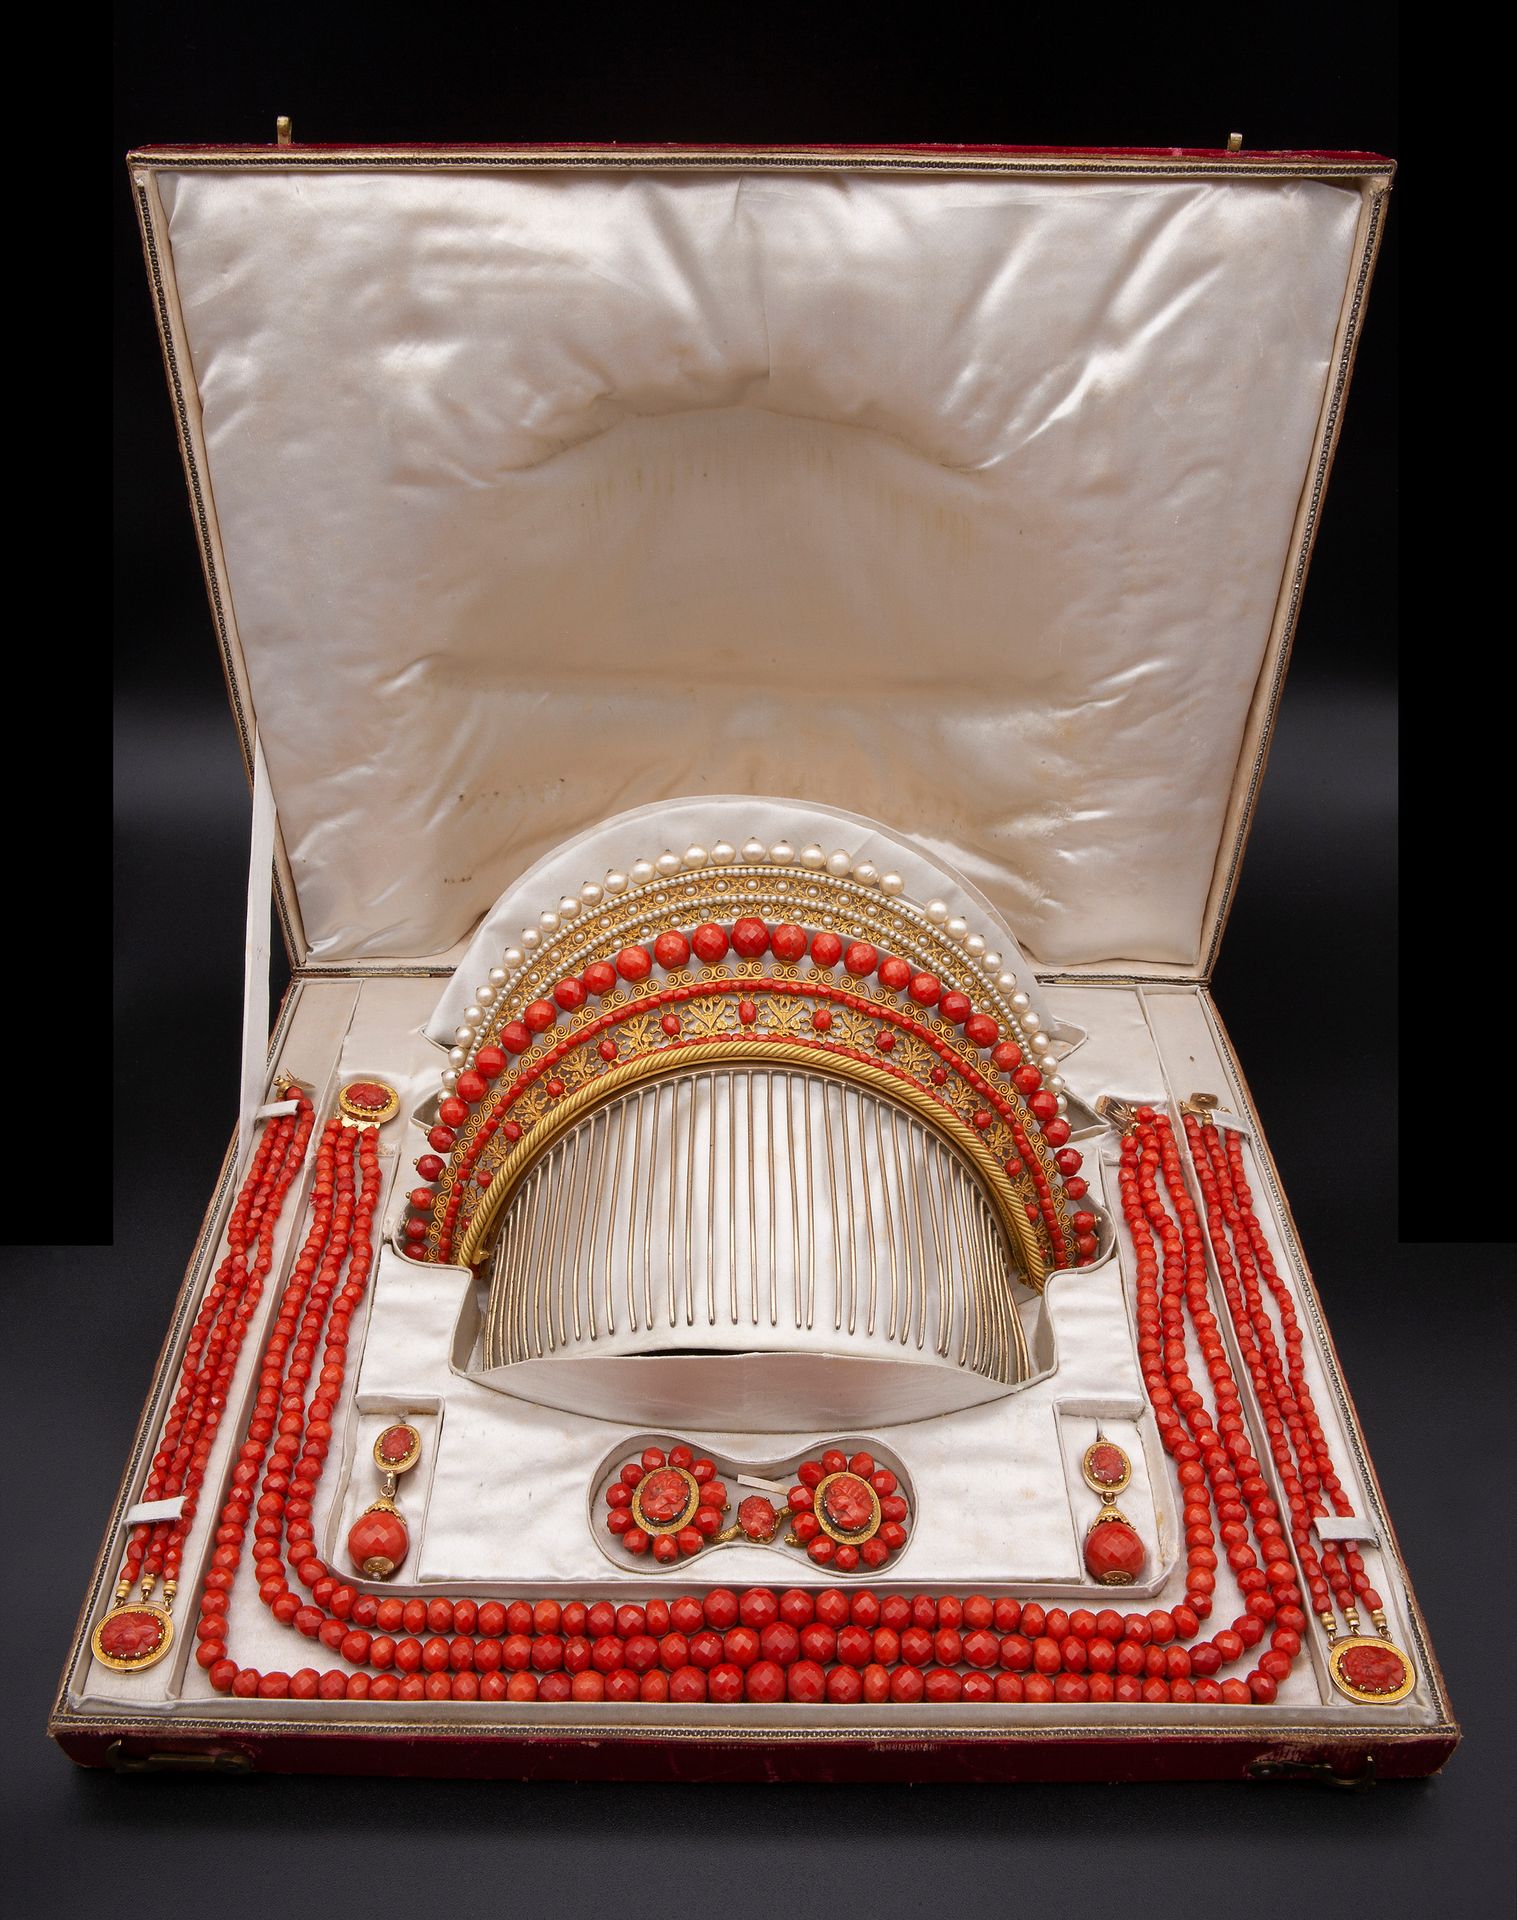 Large Napoleonic parure made of Mediterranean coral, gold and pearls Sehr feine &hellip;